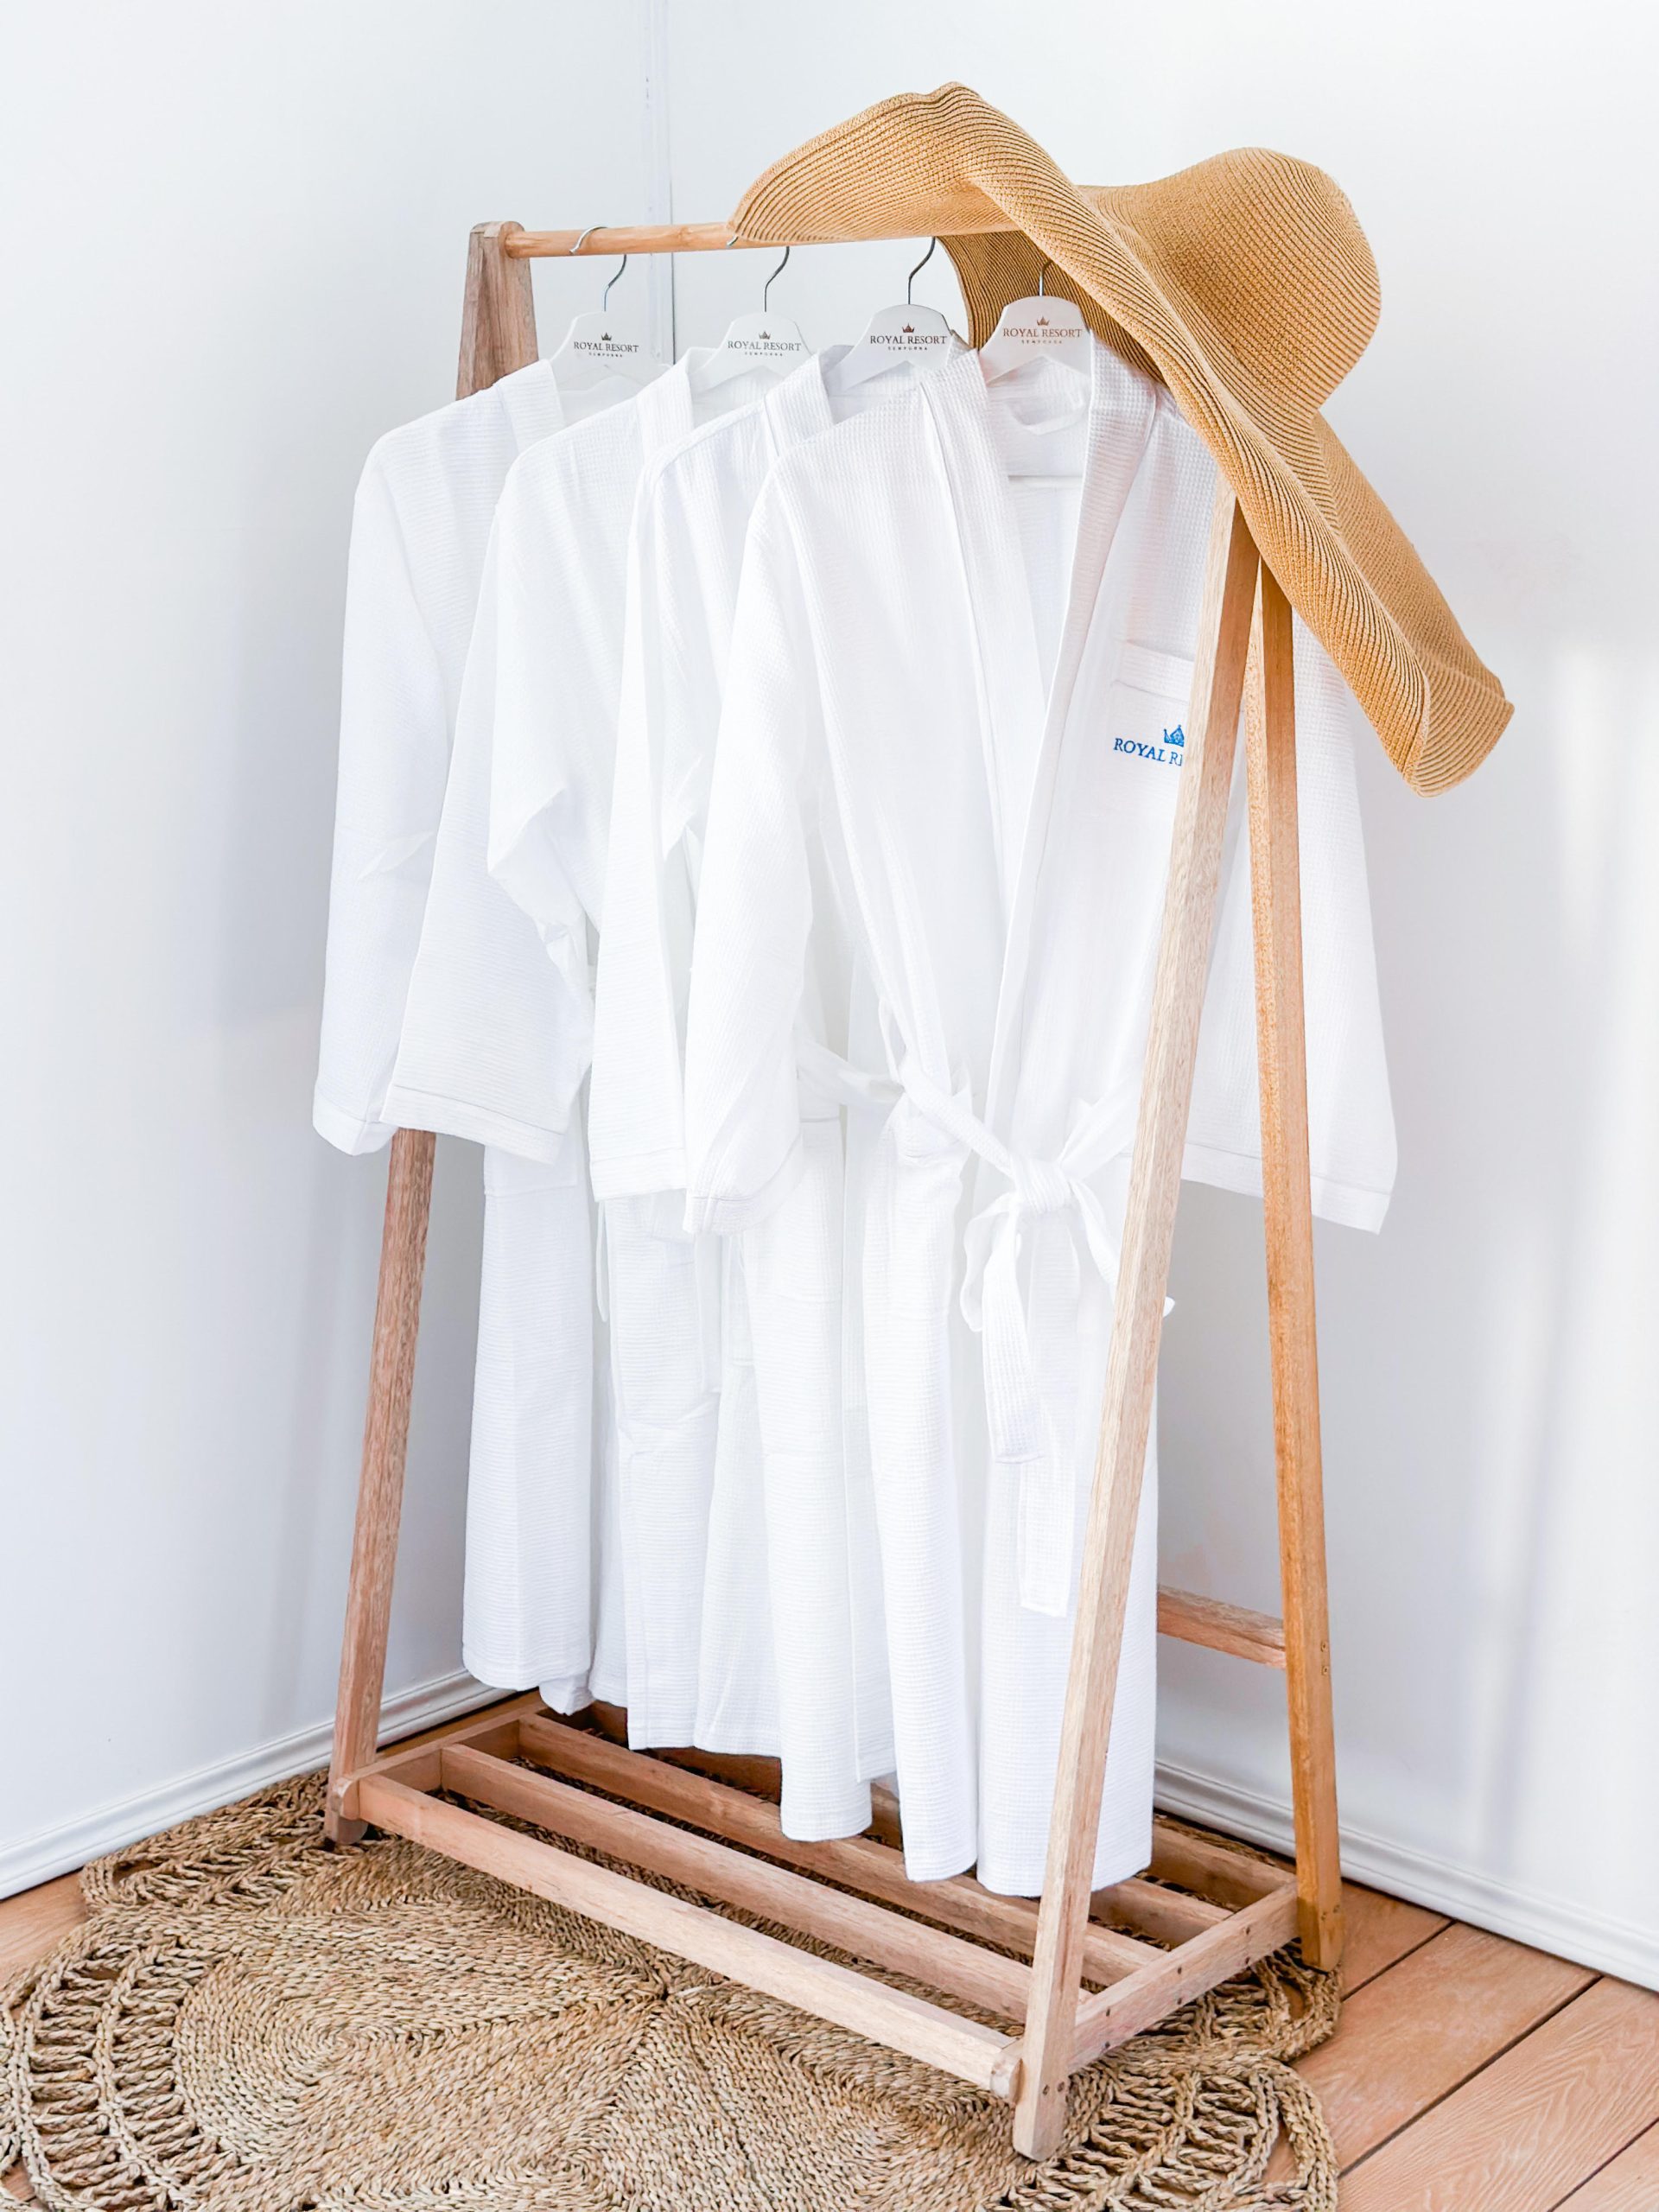 Clothes storage and hangers